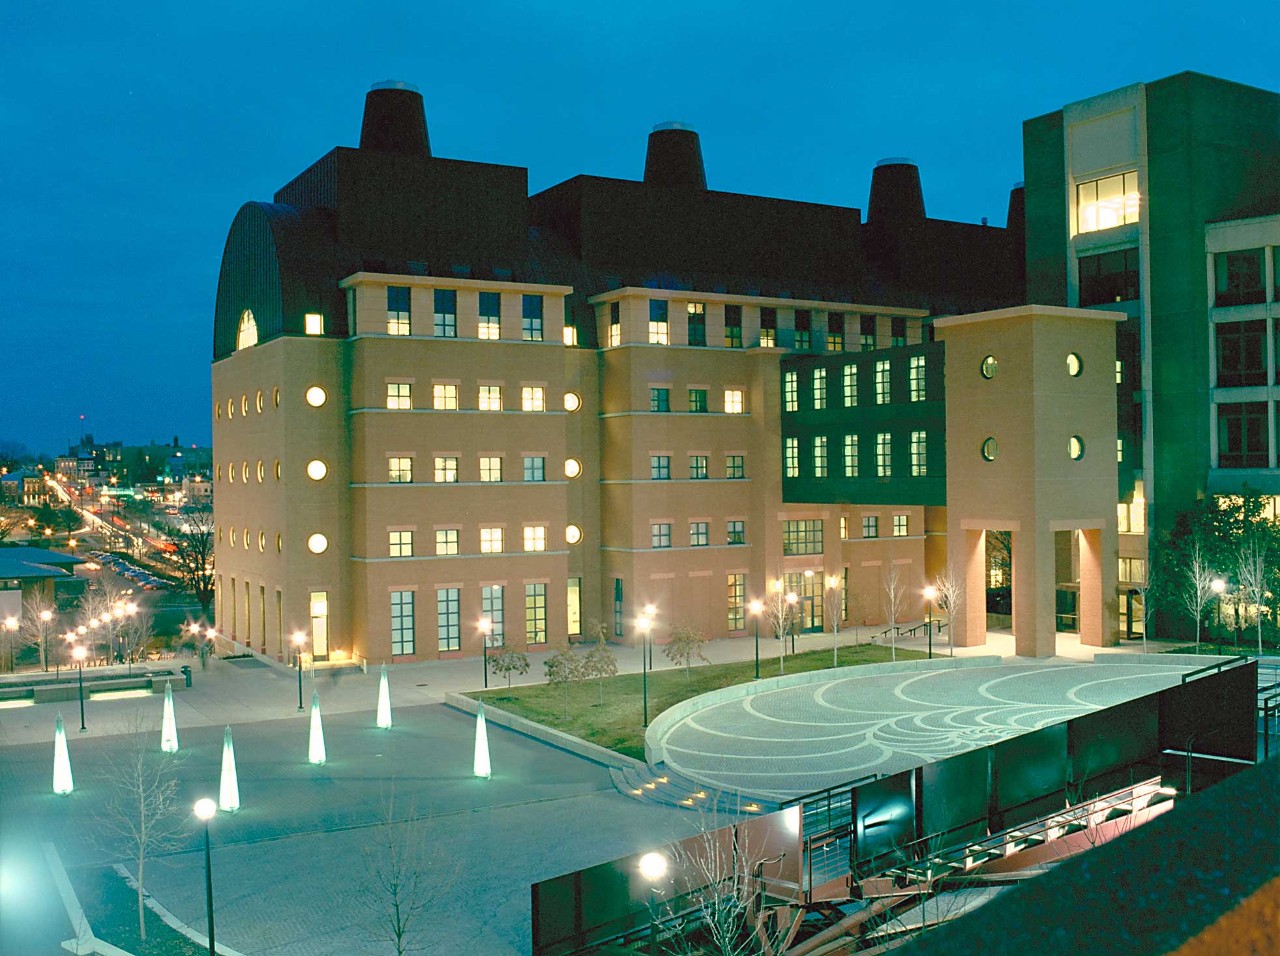 photo of engineering research center and plaza behind it at dusk